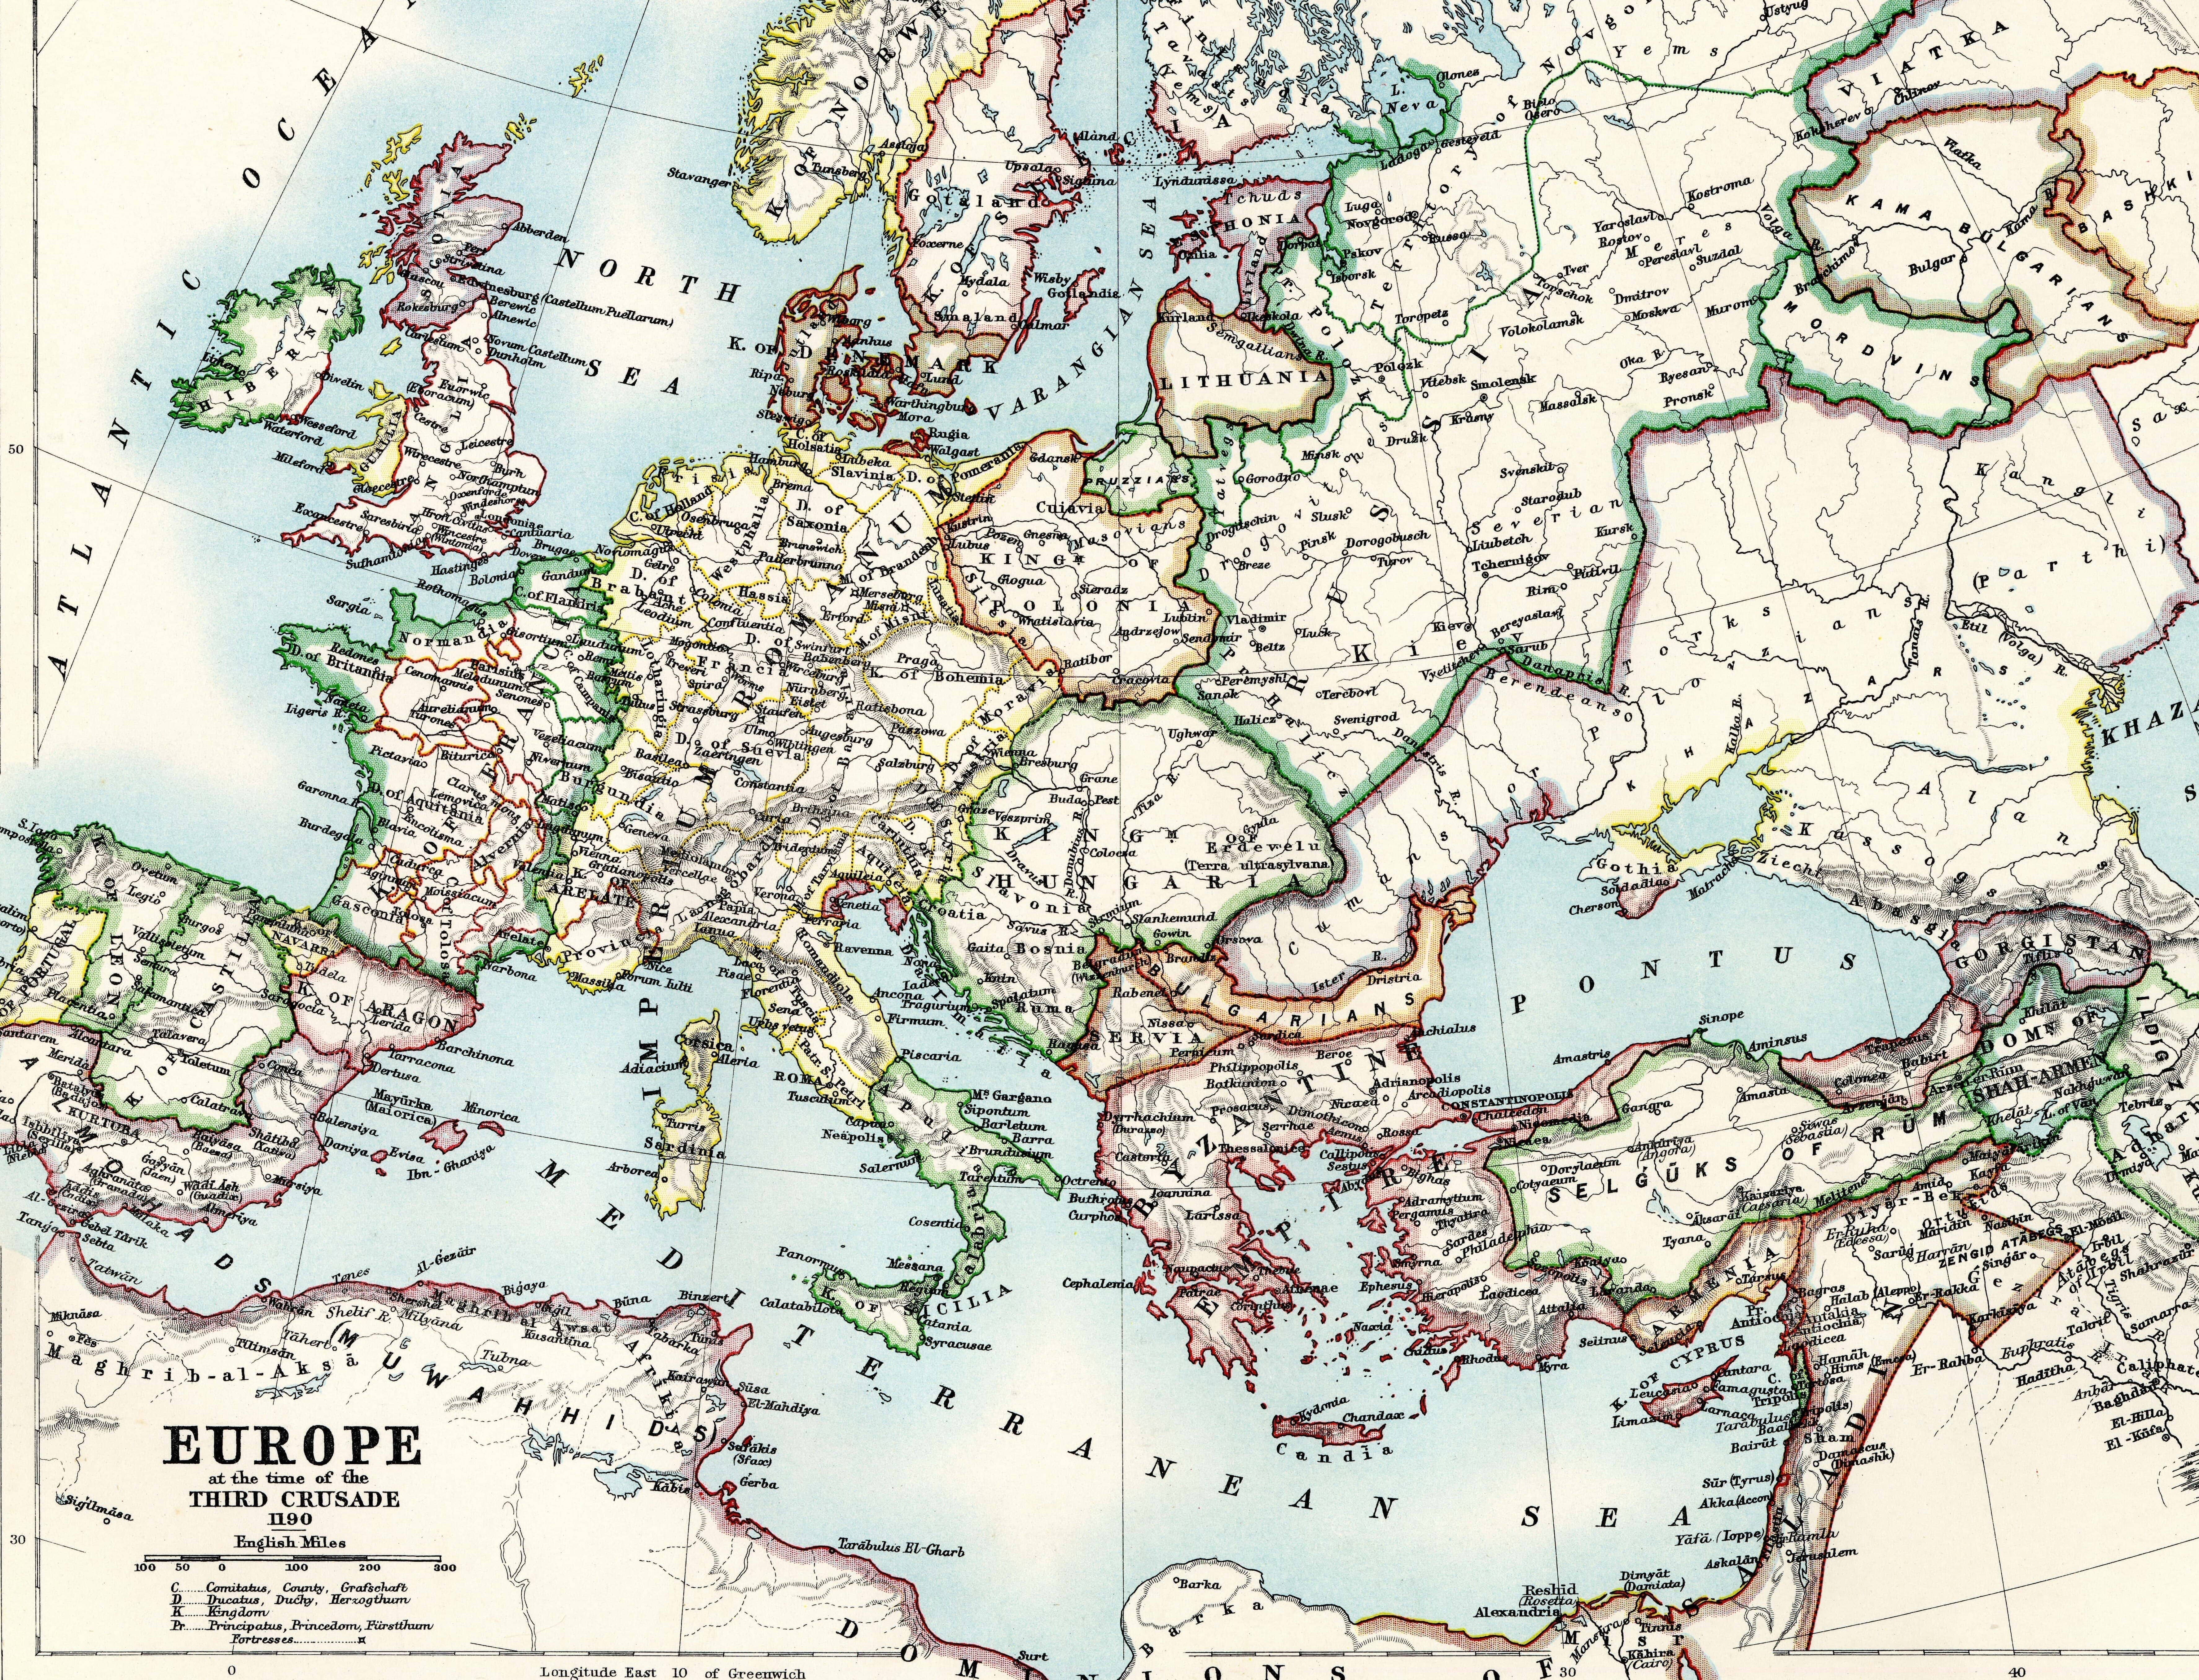 europe_at_the_time_of_the_3rd_crusade_lane_poole-min-min-min_1_1_1.jpg